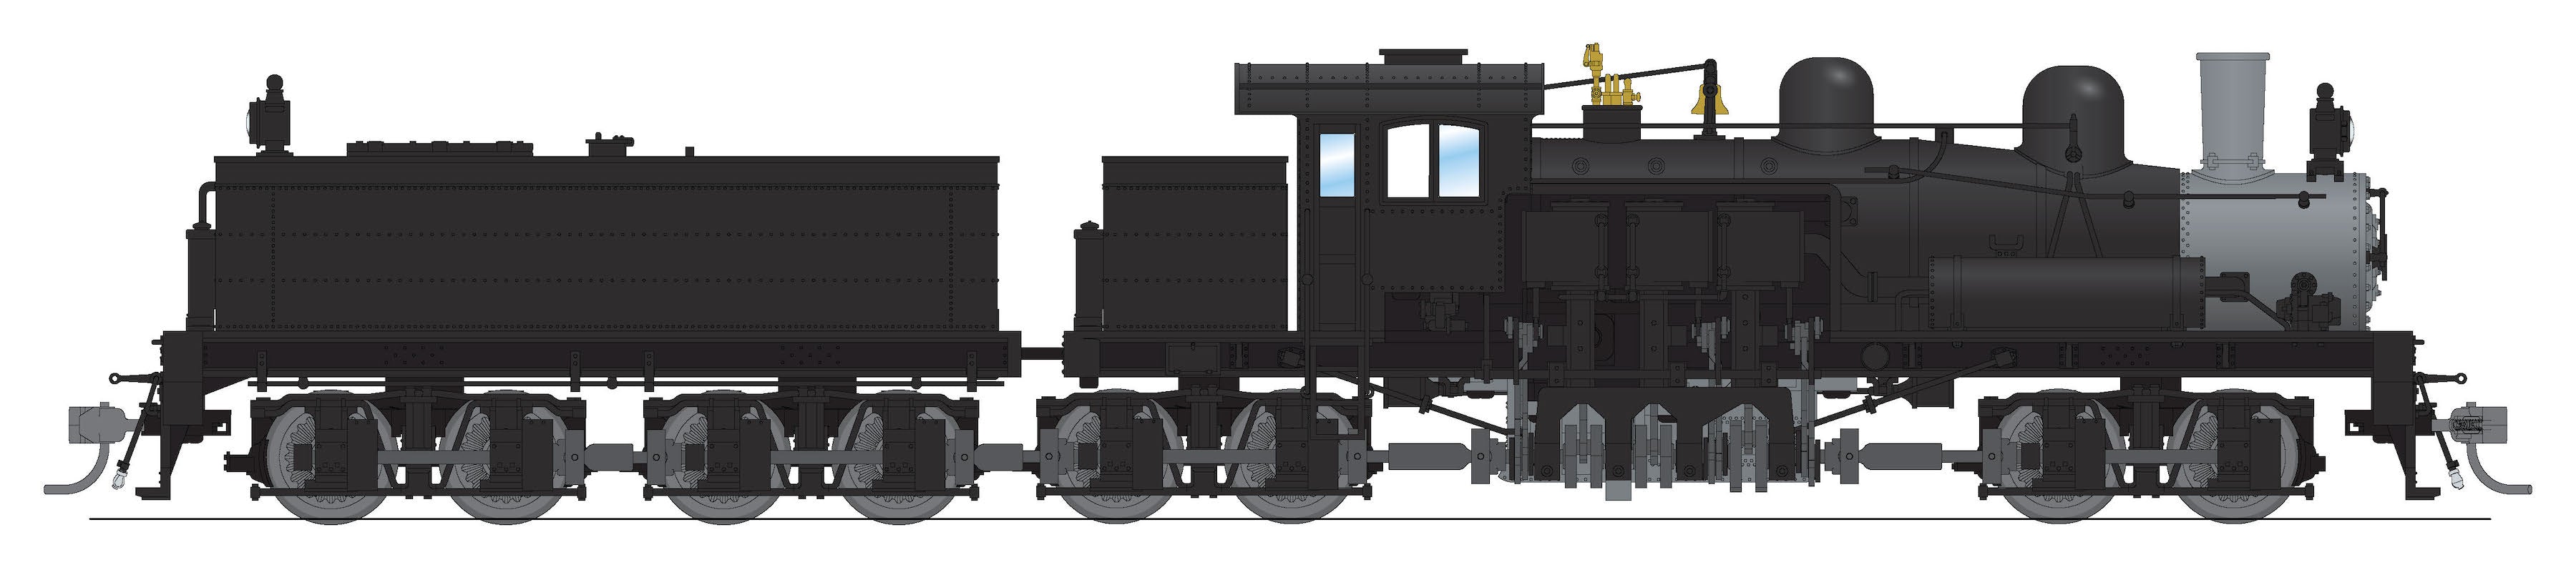 8258 Class D 4-truck Shay, Unlettered, Painted Black, No-Sound / DCC-Ready, HO